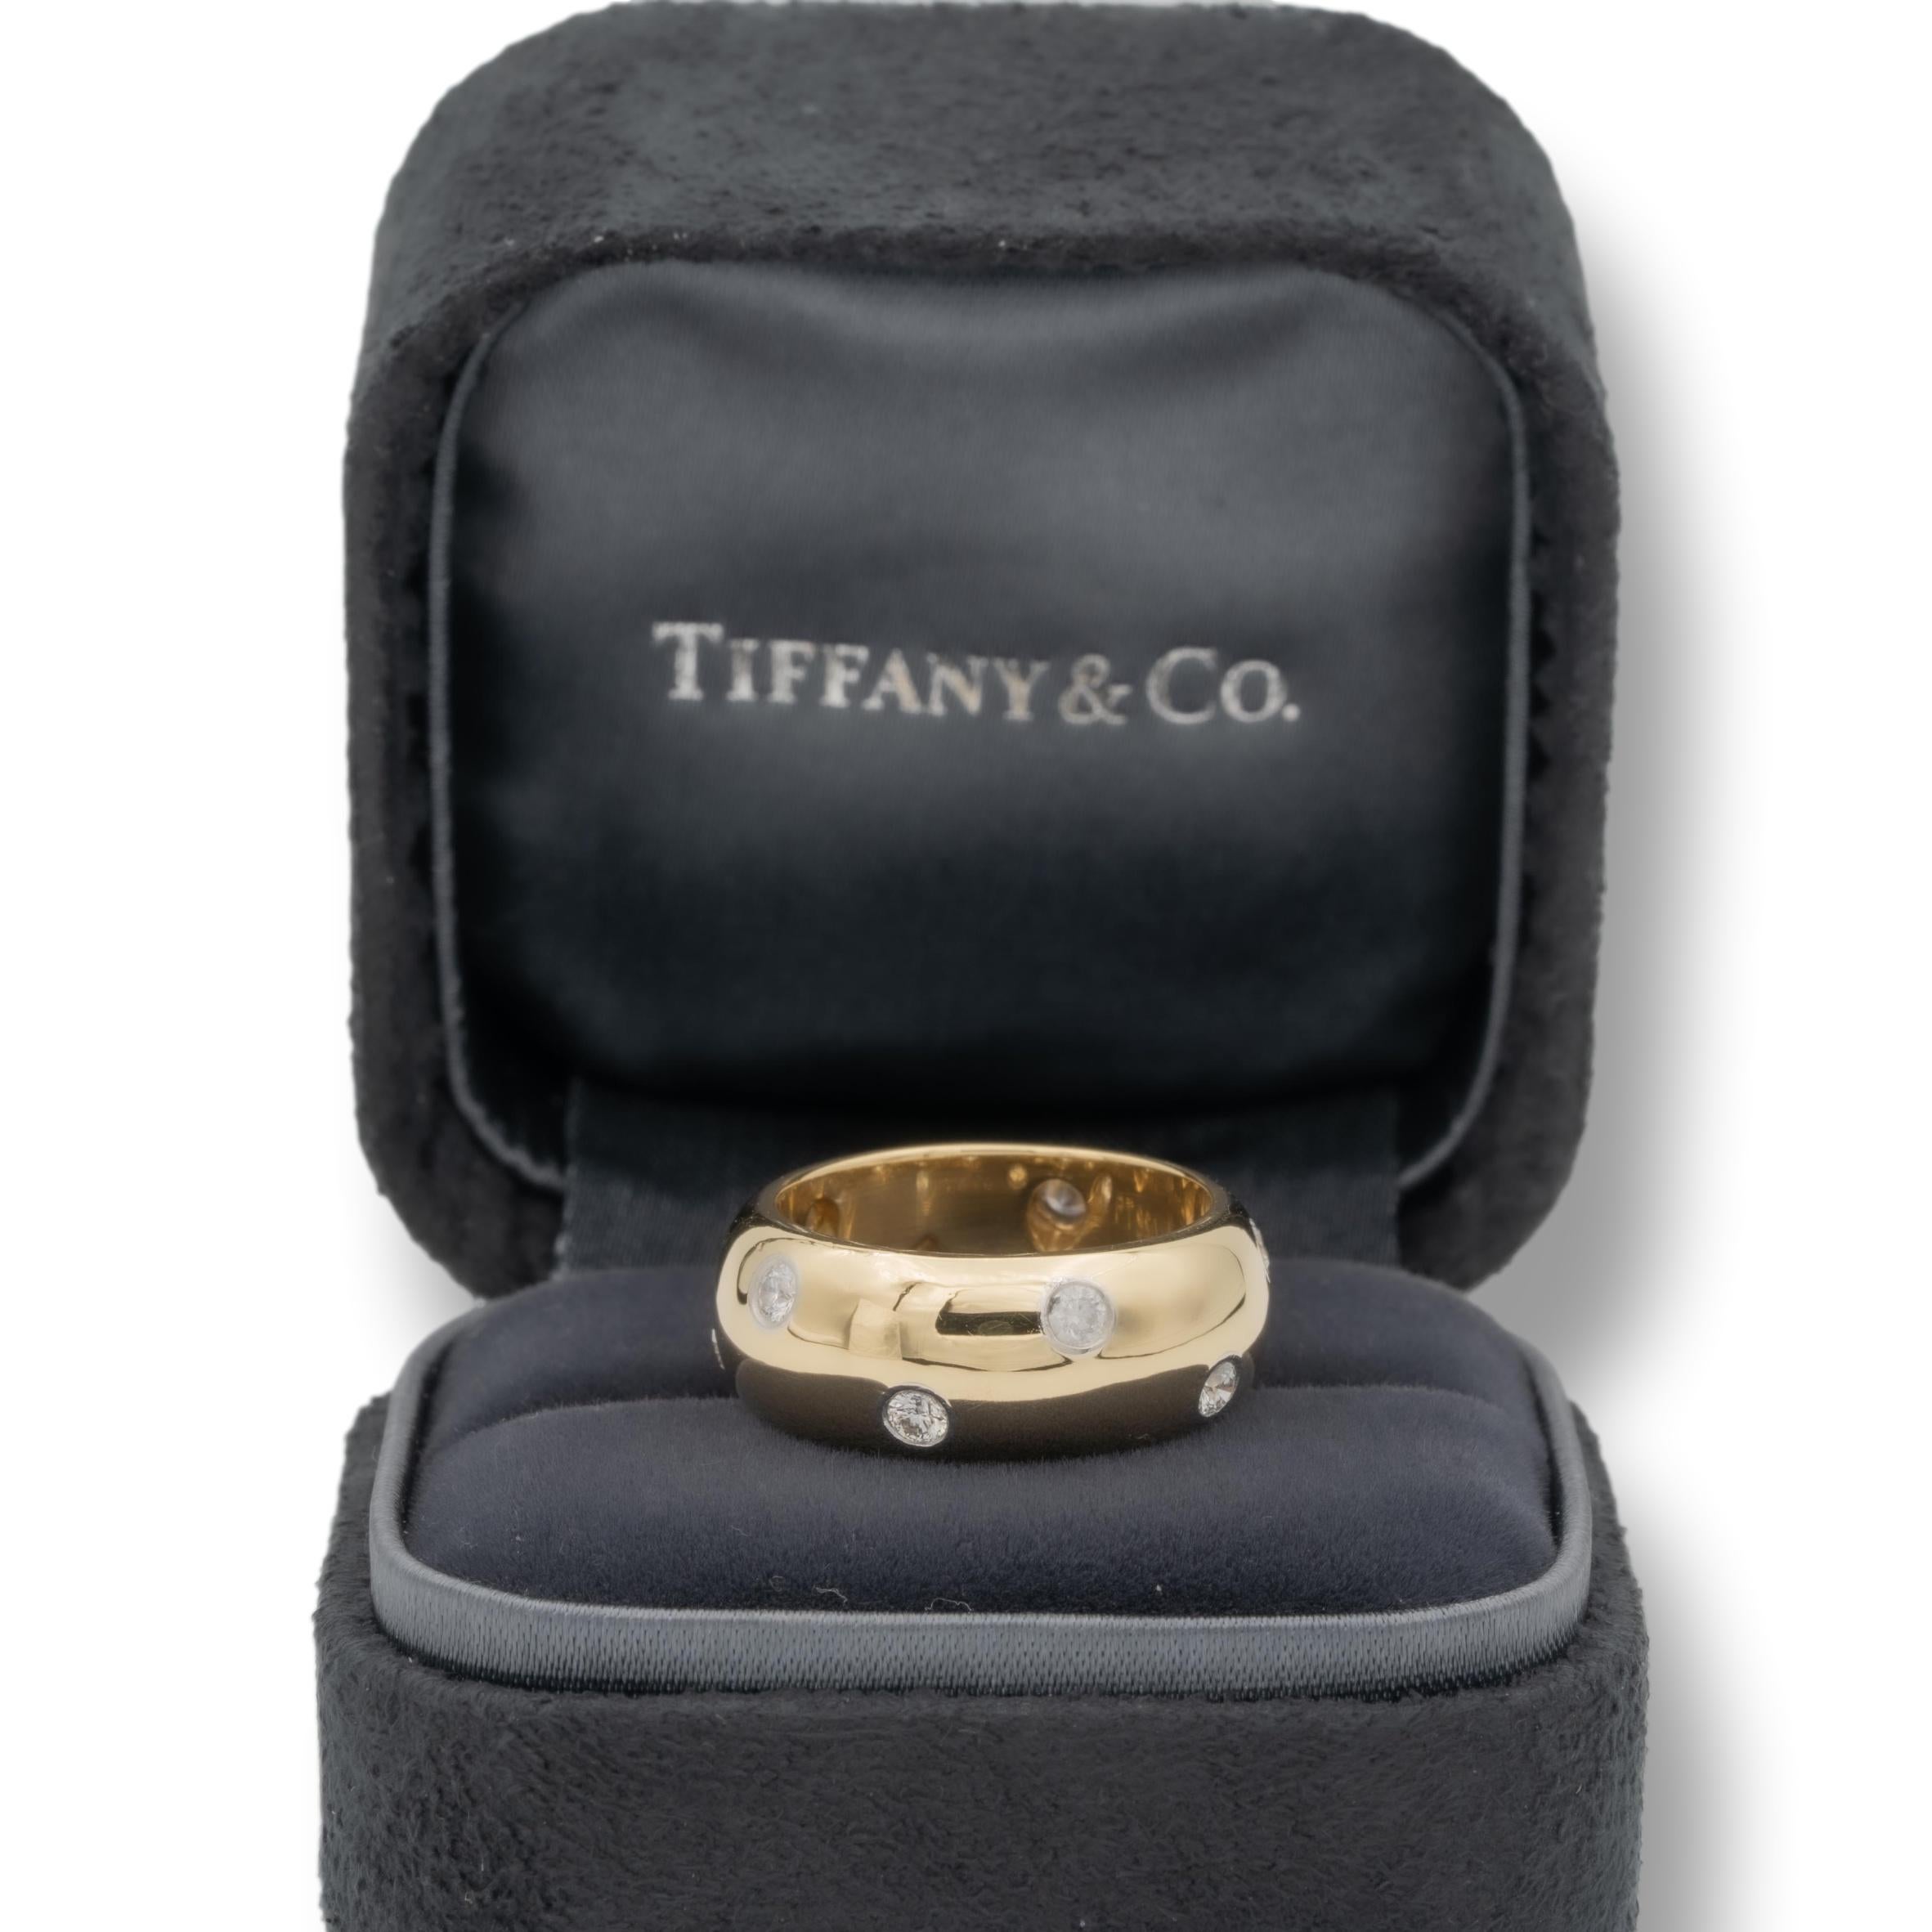 Tiffany & Co. Etoile Domed Band Ring finely crafted in 18 Karat yellow gold measuring 8mm wide with 10 round brilliant cut diamonds set in platinum bezels weighing 0.40 carats total weight approximately. The band is domed and comfort fit.

Stamp: